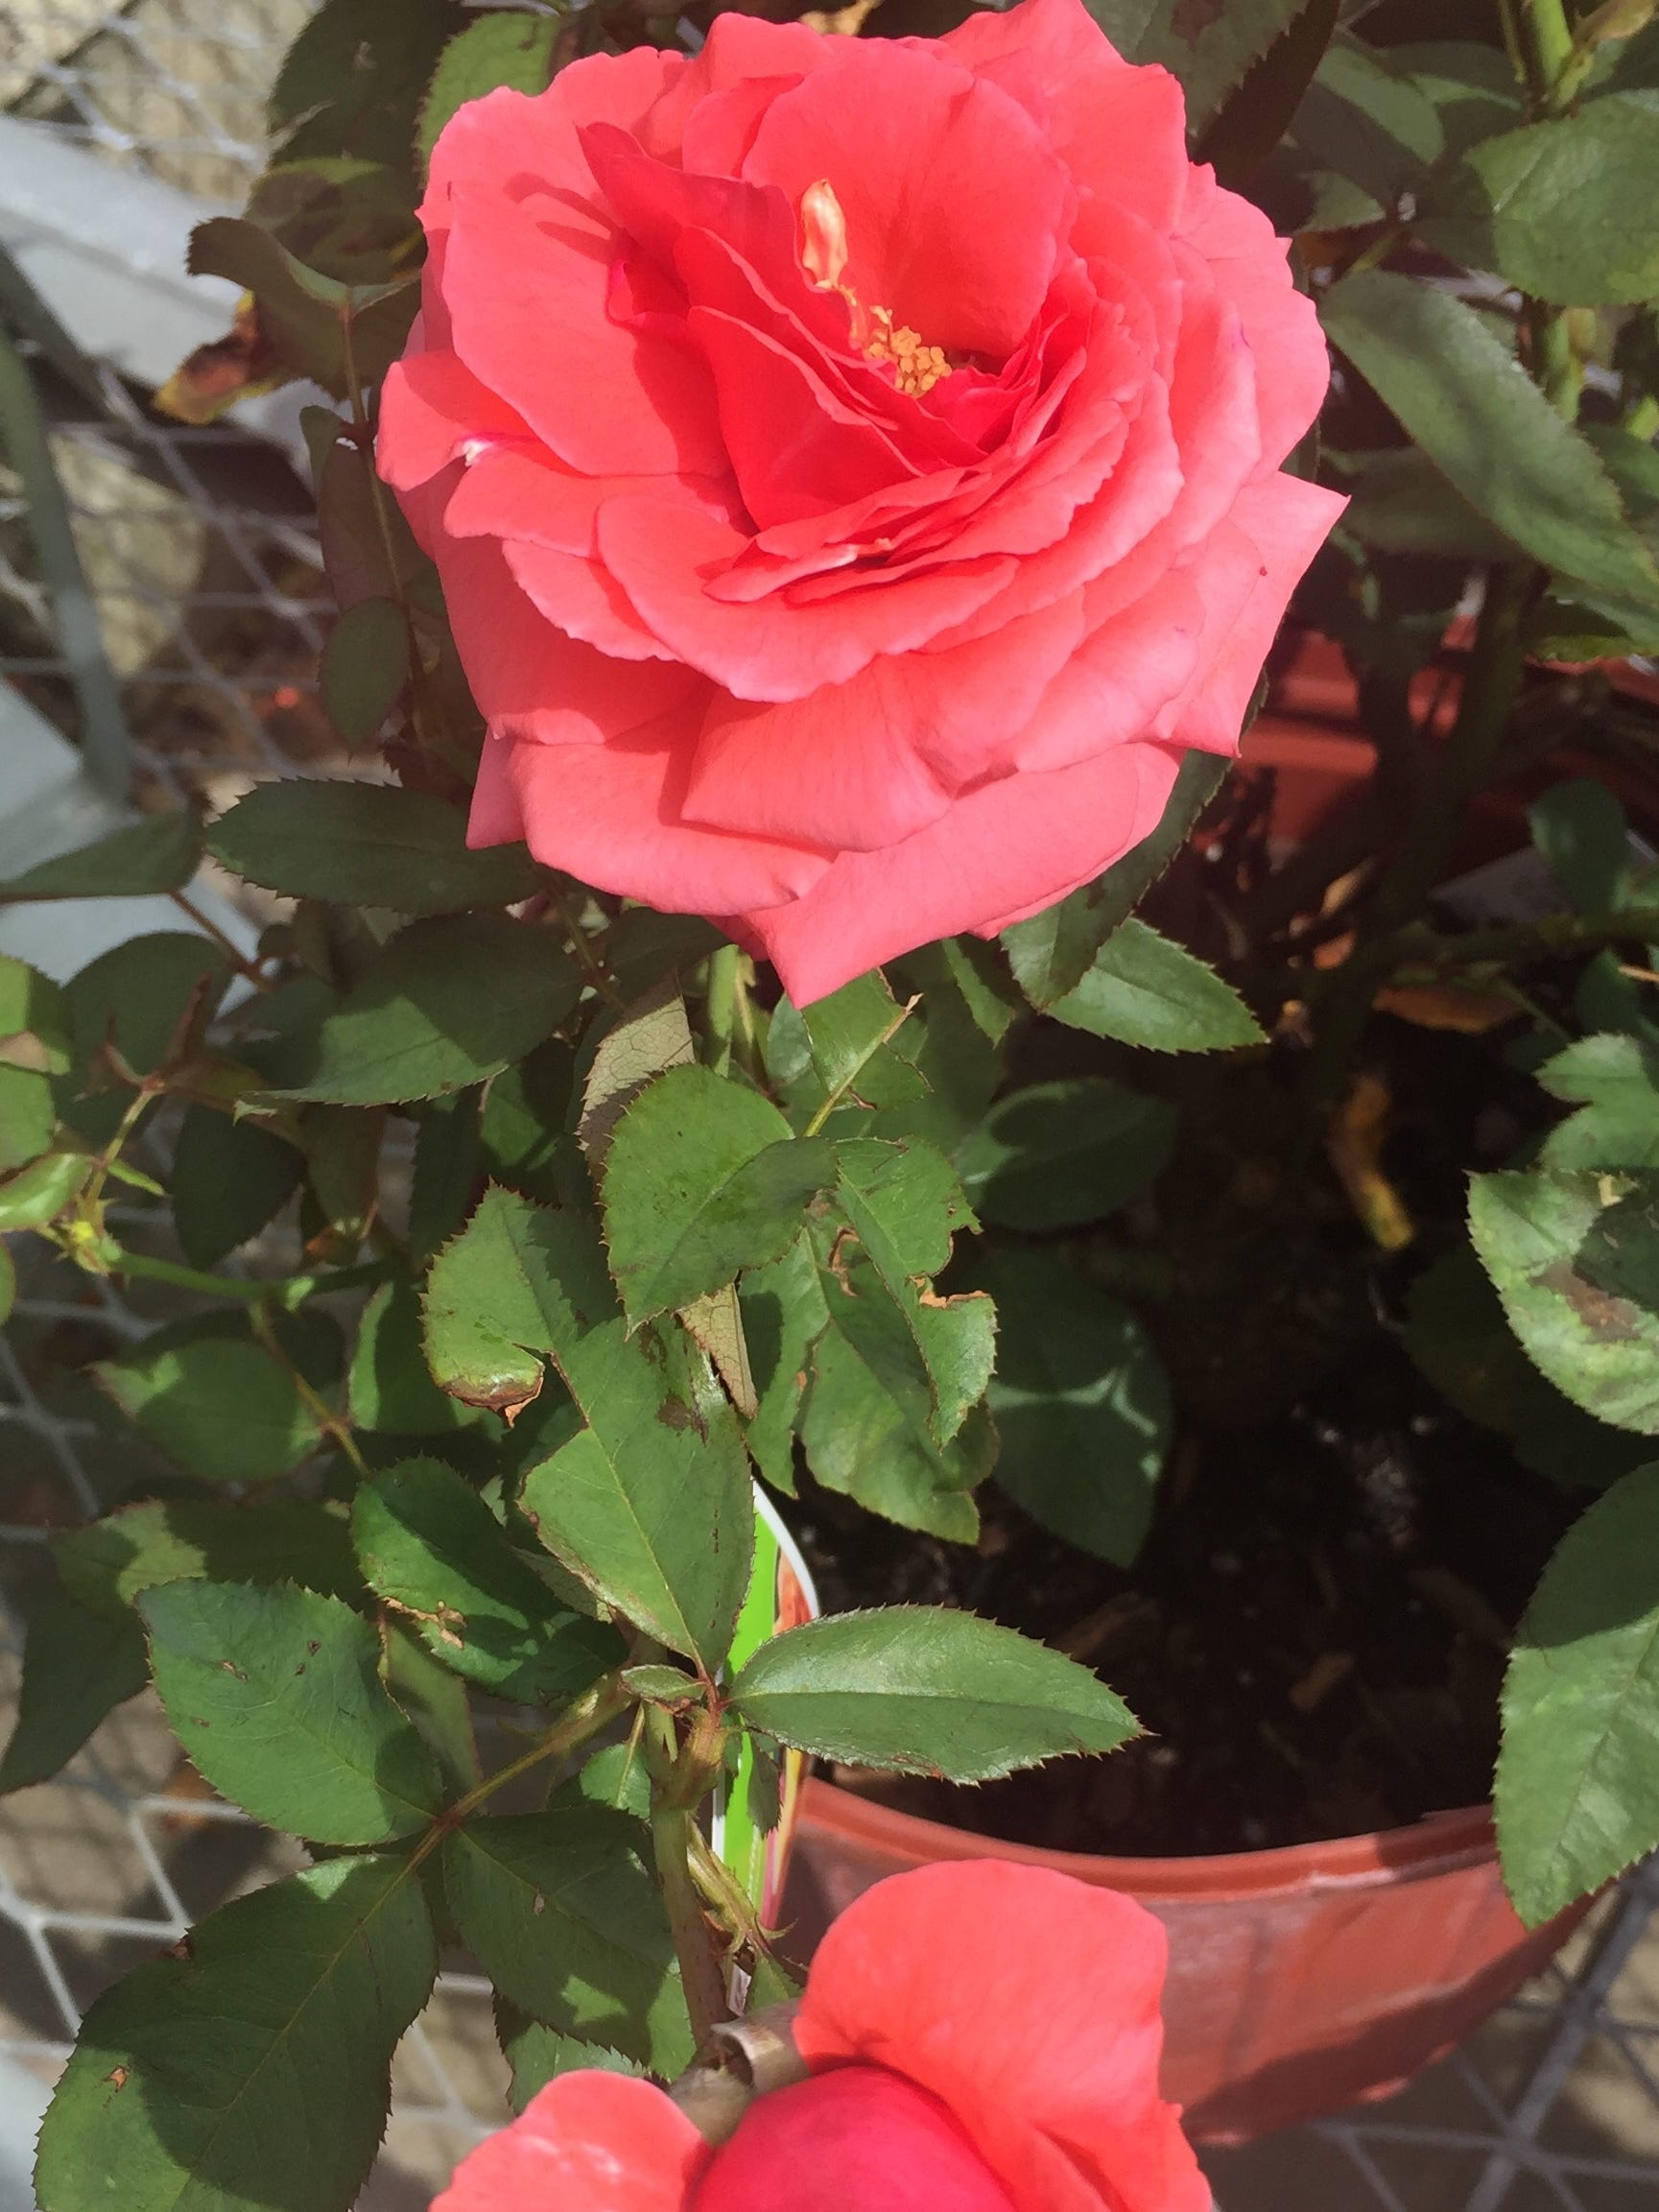 Roses CAN grow in SW Florida, but it's not easy